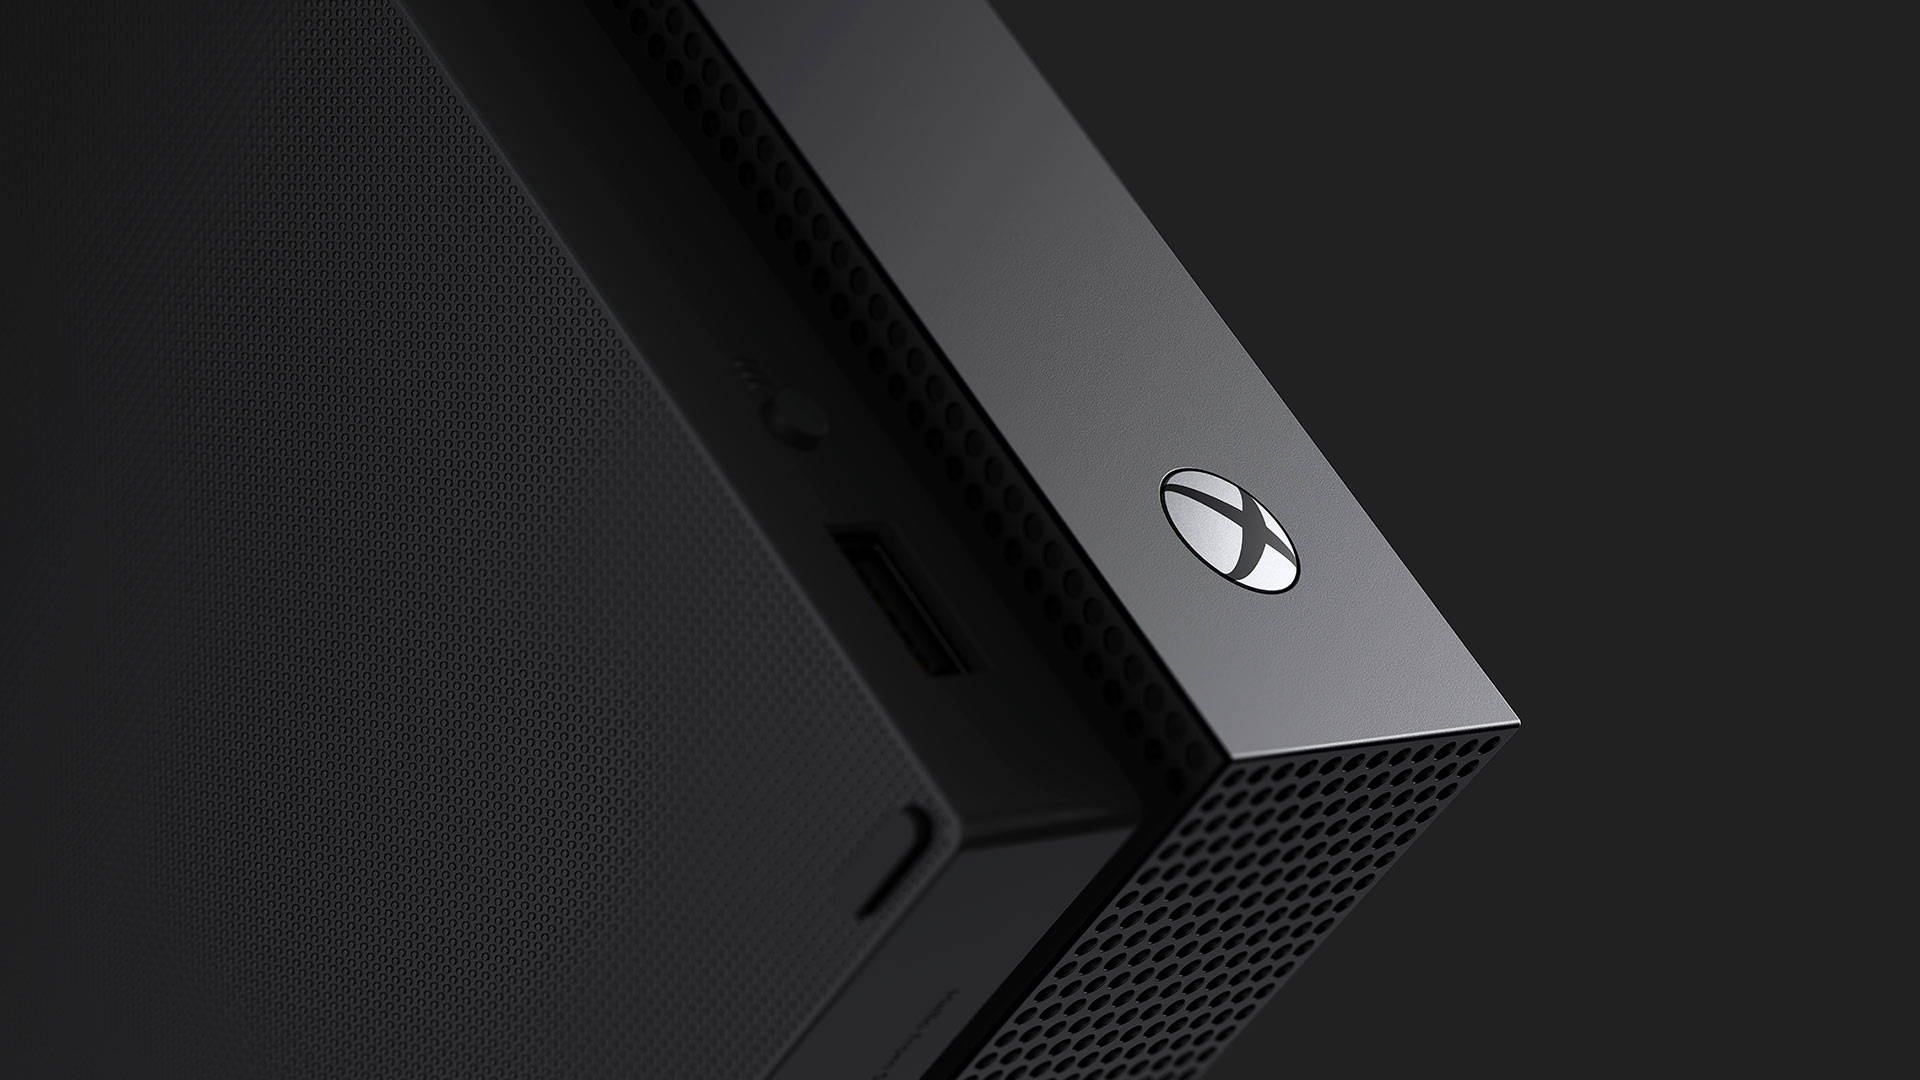 Xbox One X Console Close Up Shot Wallpaper